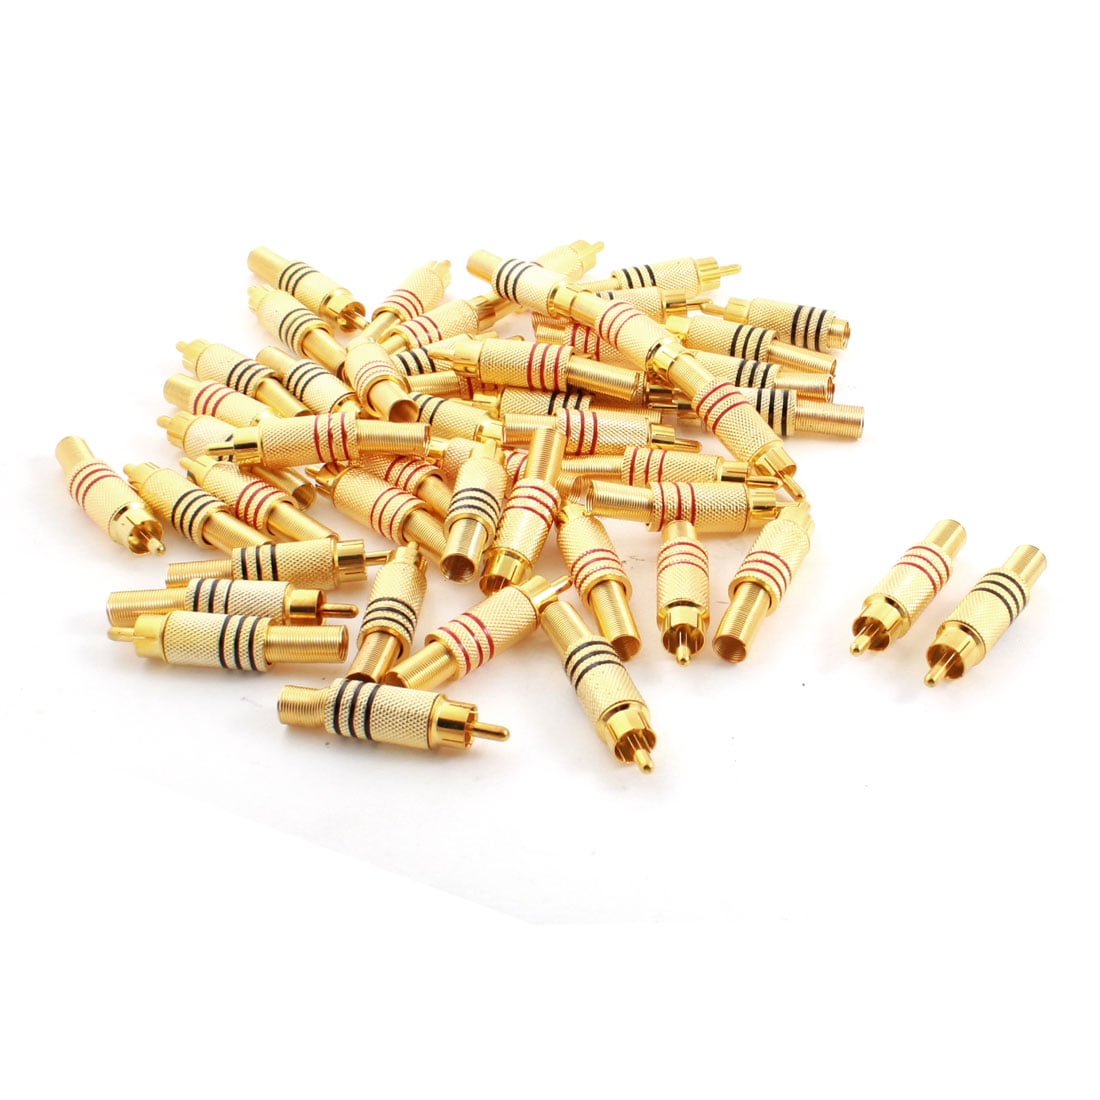 10 Pcs Brass Gold Plated RCA Male Plug Adapter Connector soldering S T2 